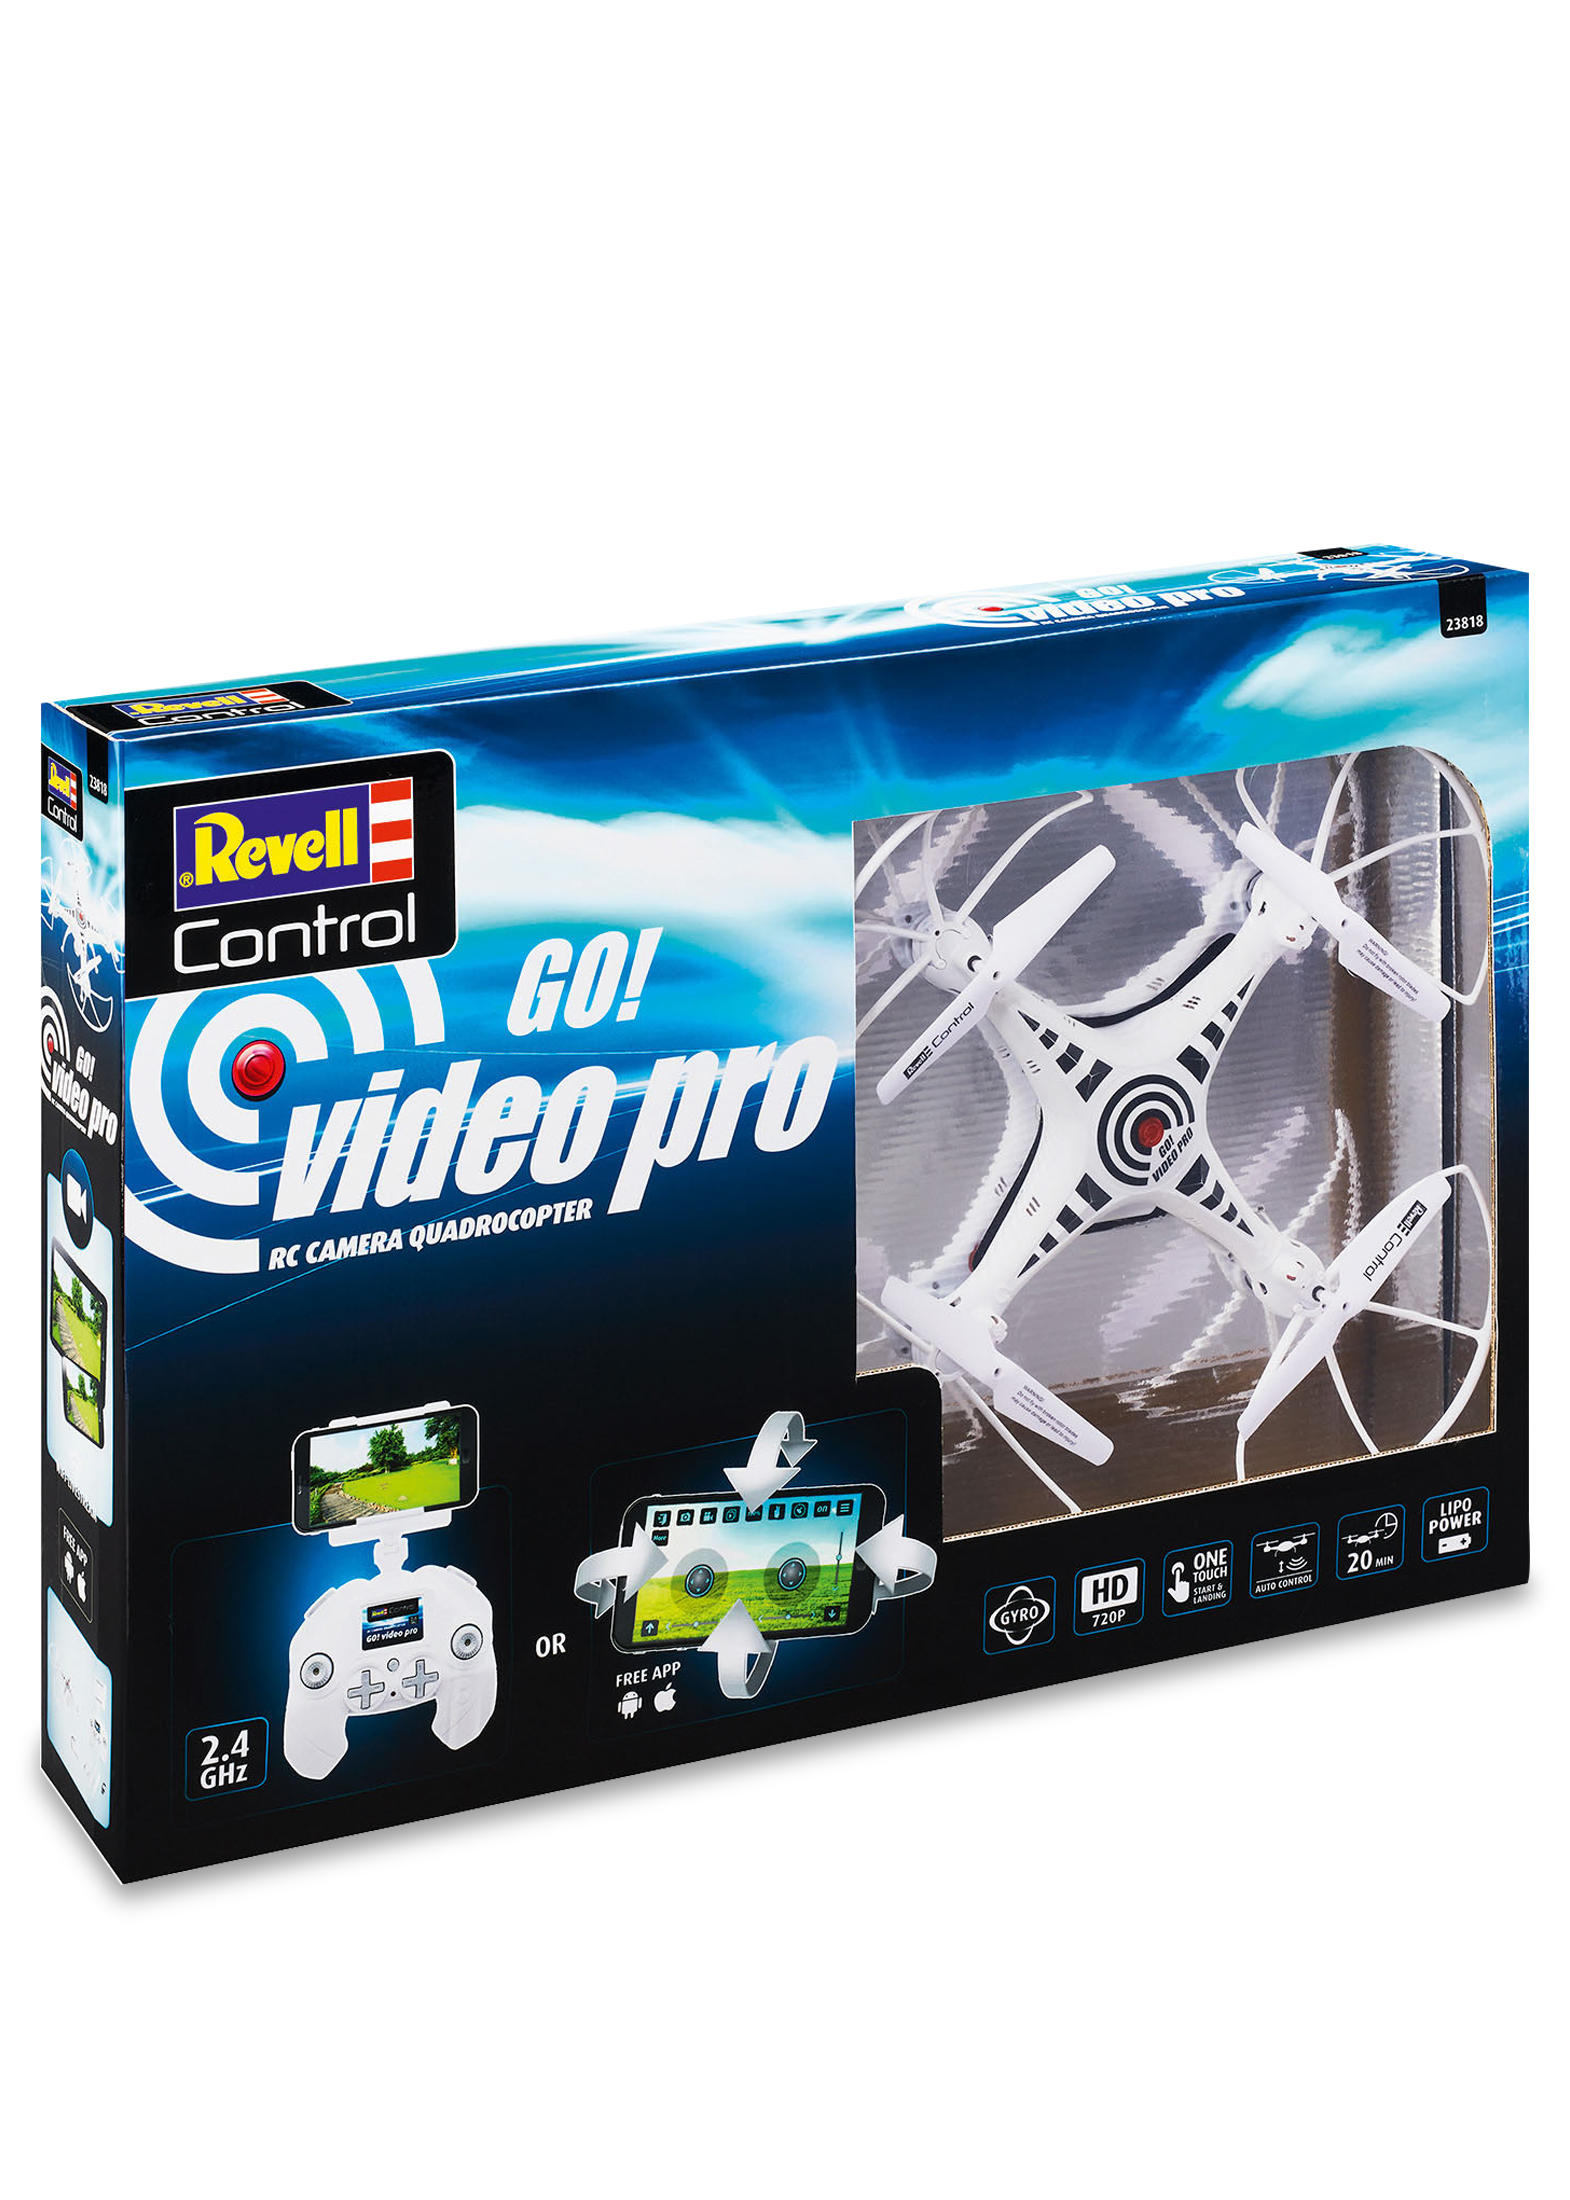 RC Camera-Quadrocopter "Go! VIDEO PRO" image number 1